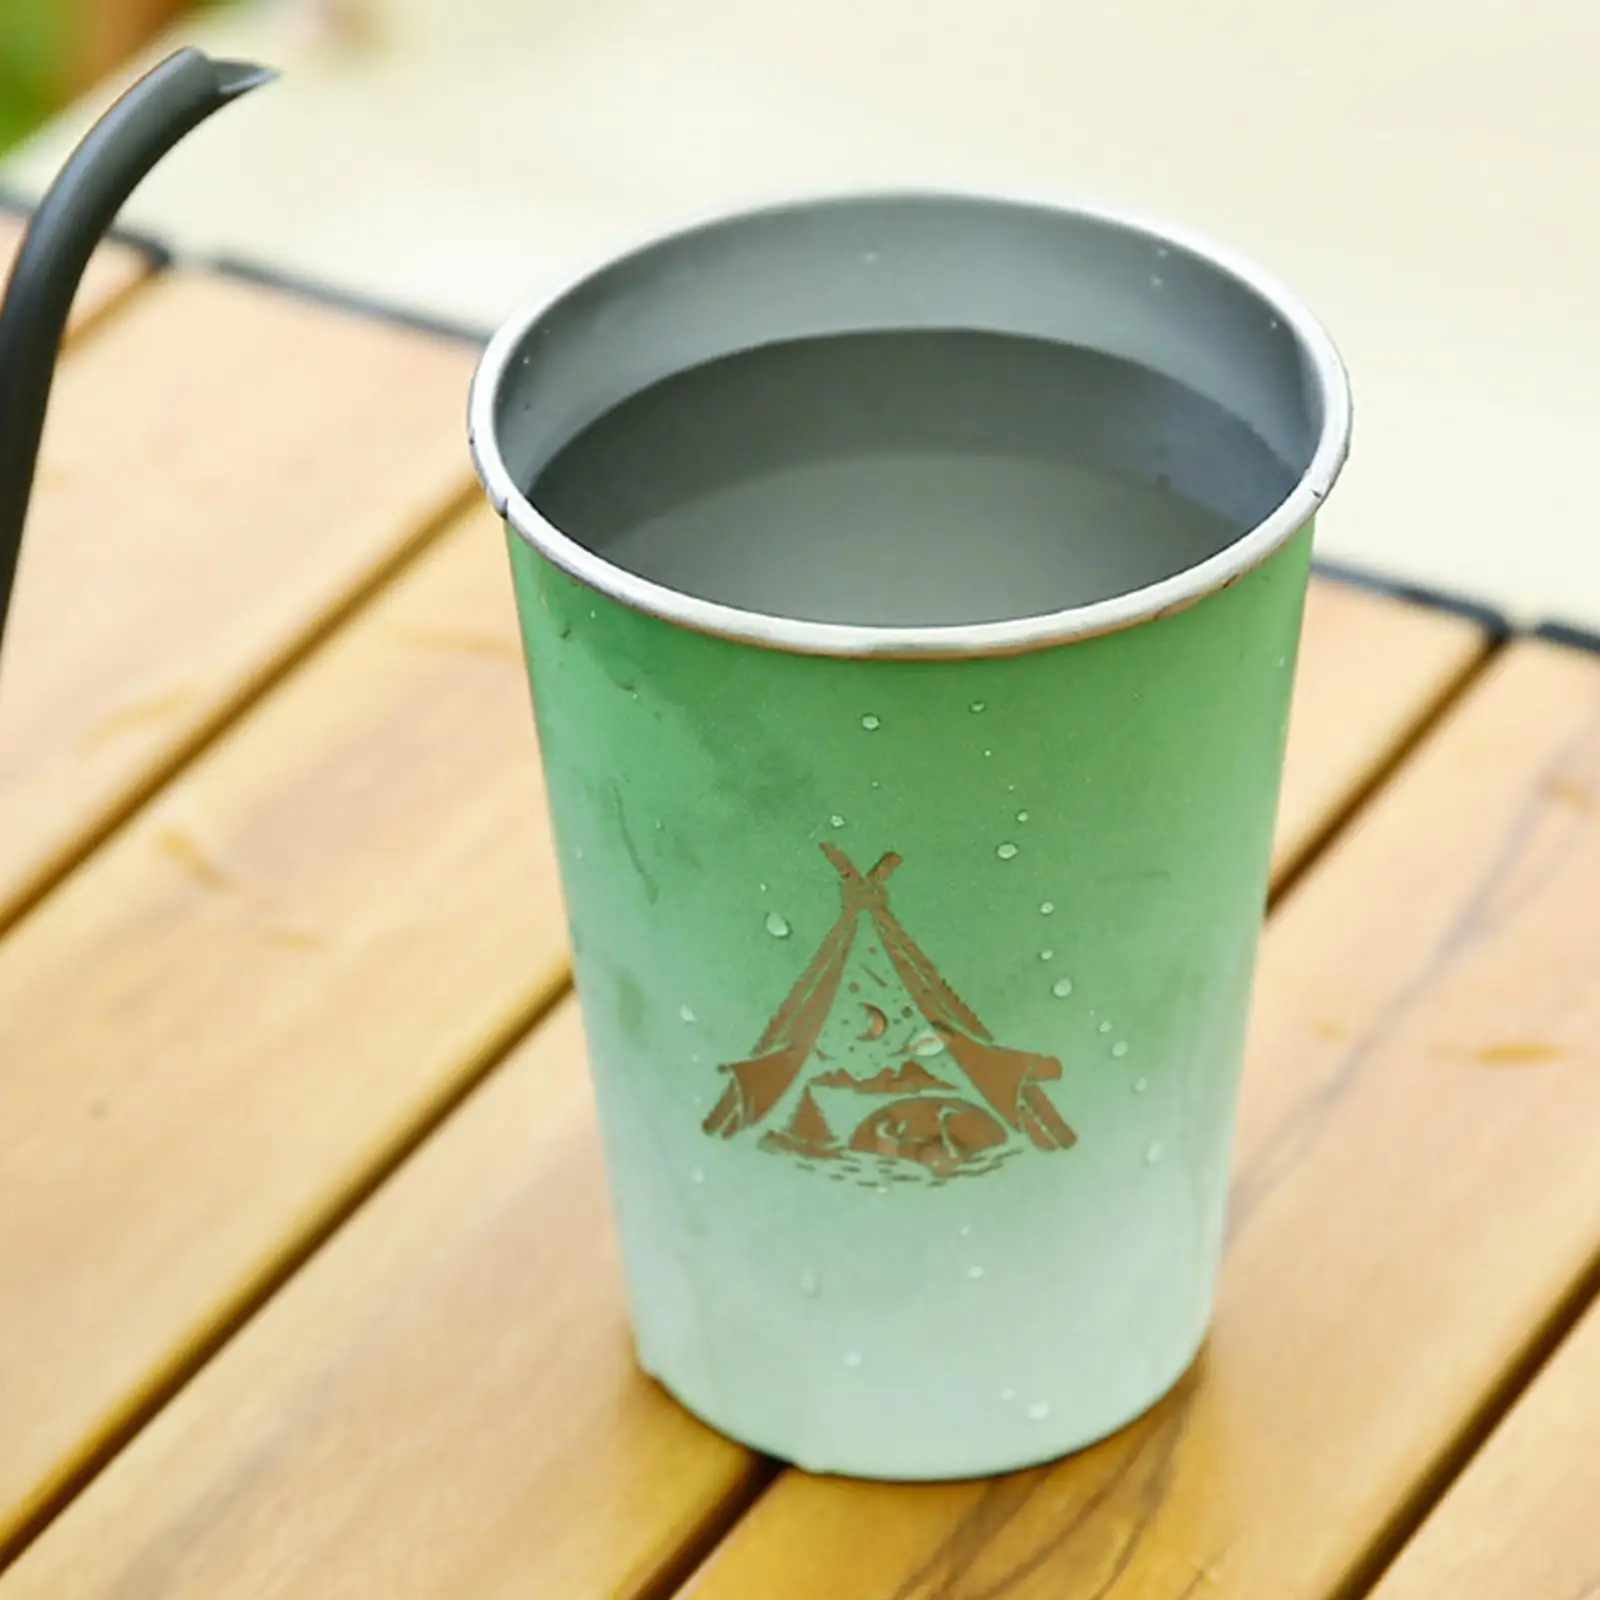 4Pcs Stainless Steel Cup Camping Portable with Bag 350ml Tableware Water Tumblers for Climbing Drinkware Drinking Office Kitchen